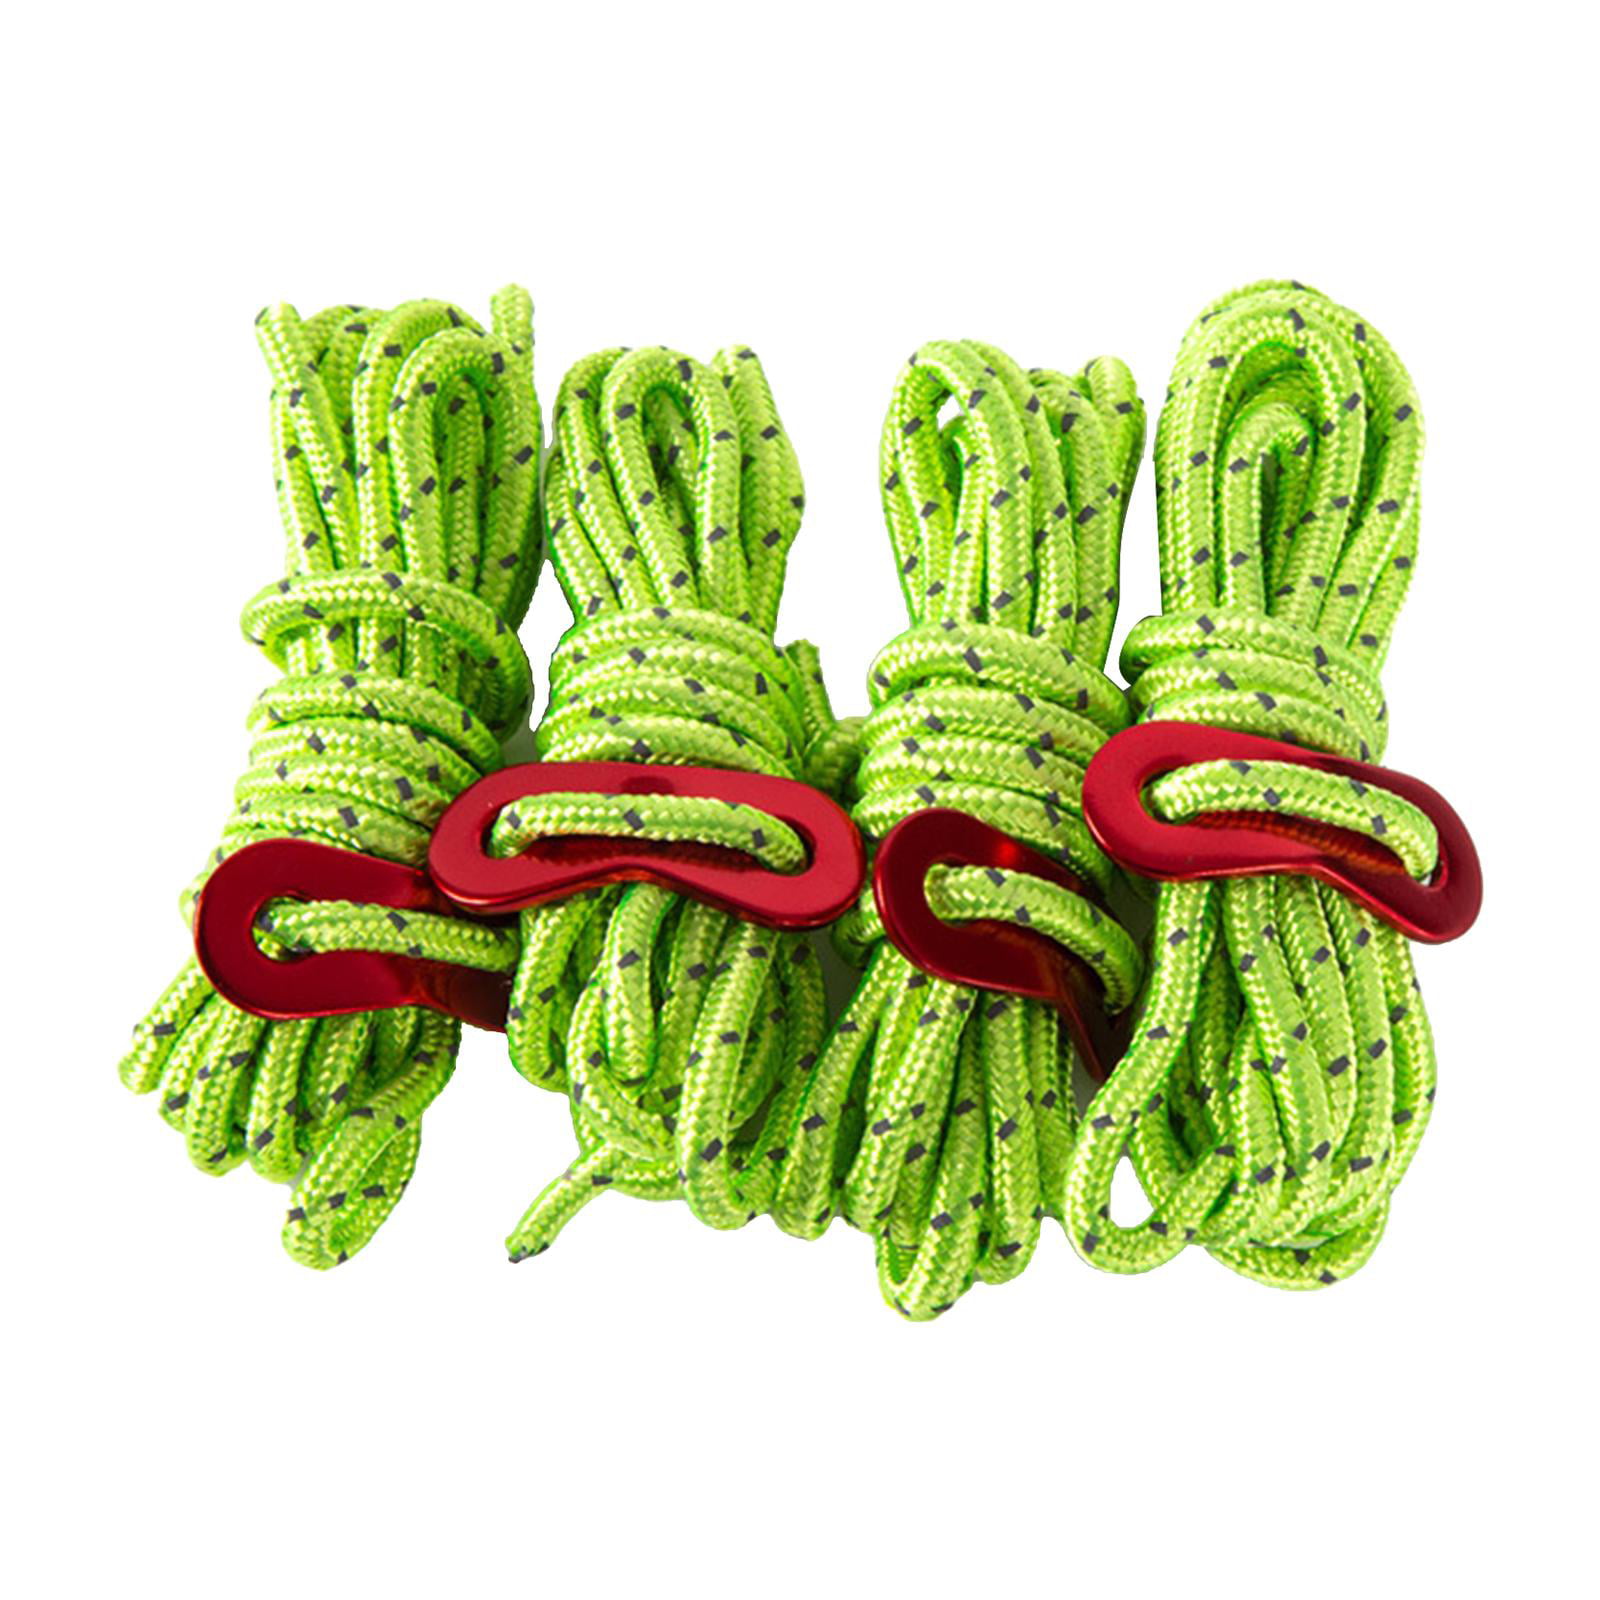 X4 GLOW IN THE DARK REFLECTIVE GUY LINE ROPES AND RUNNERS 3M TENT CAMPING ROPE 